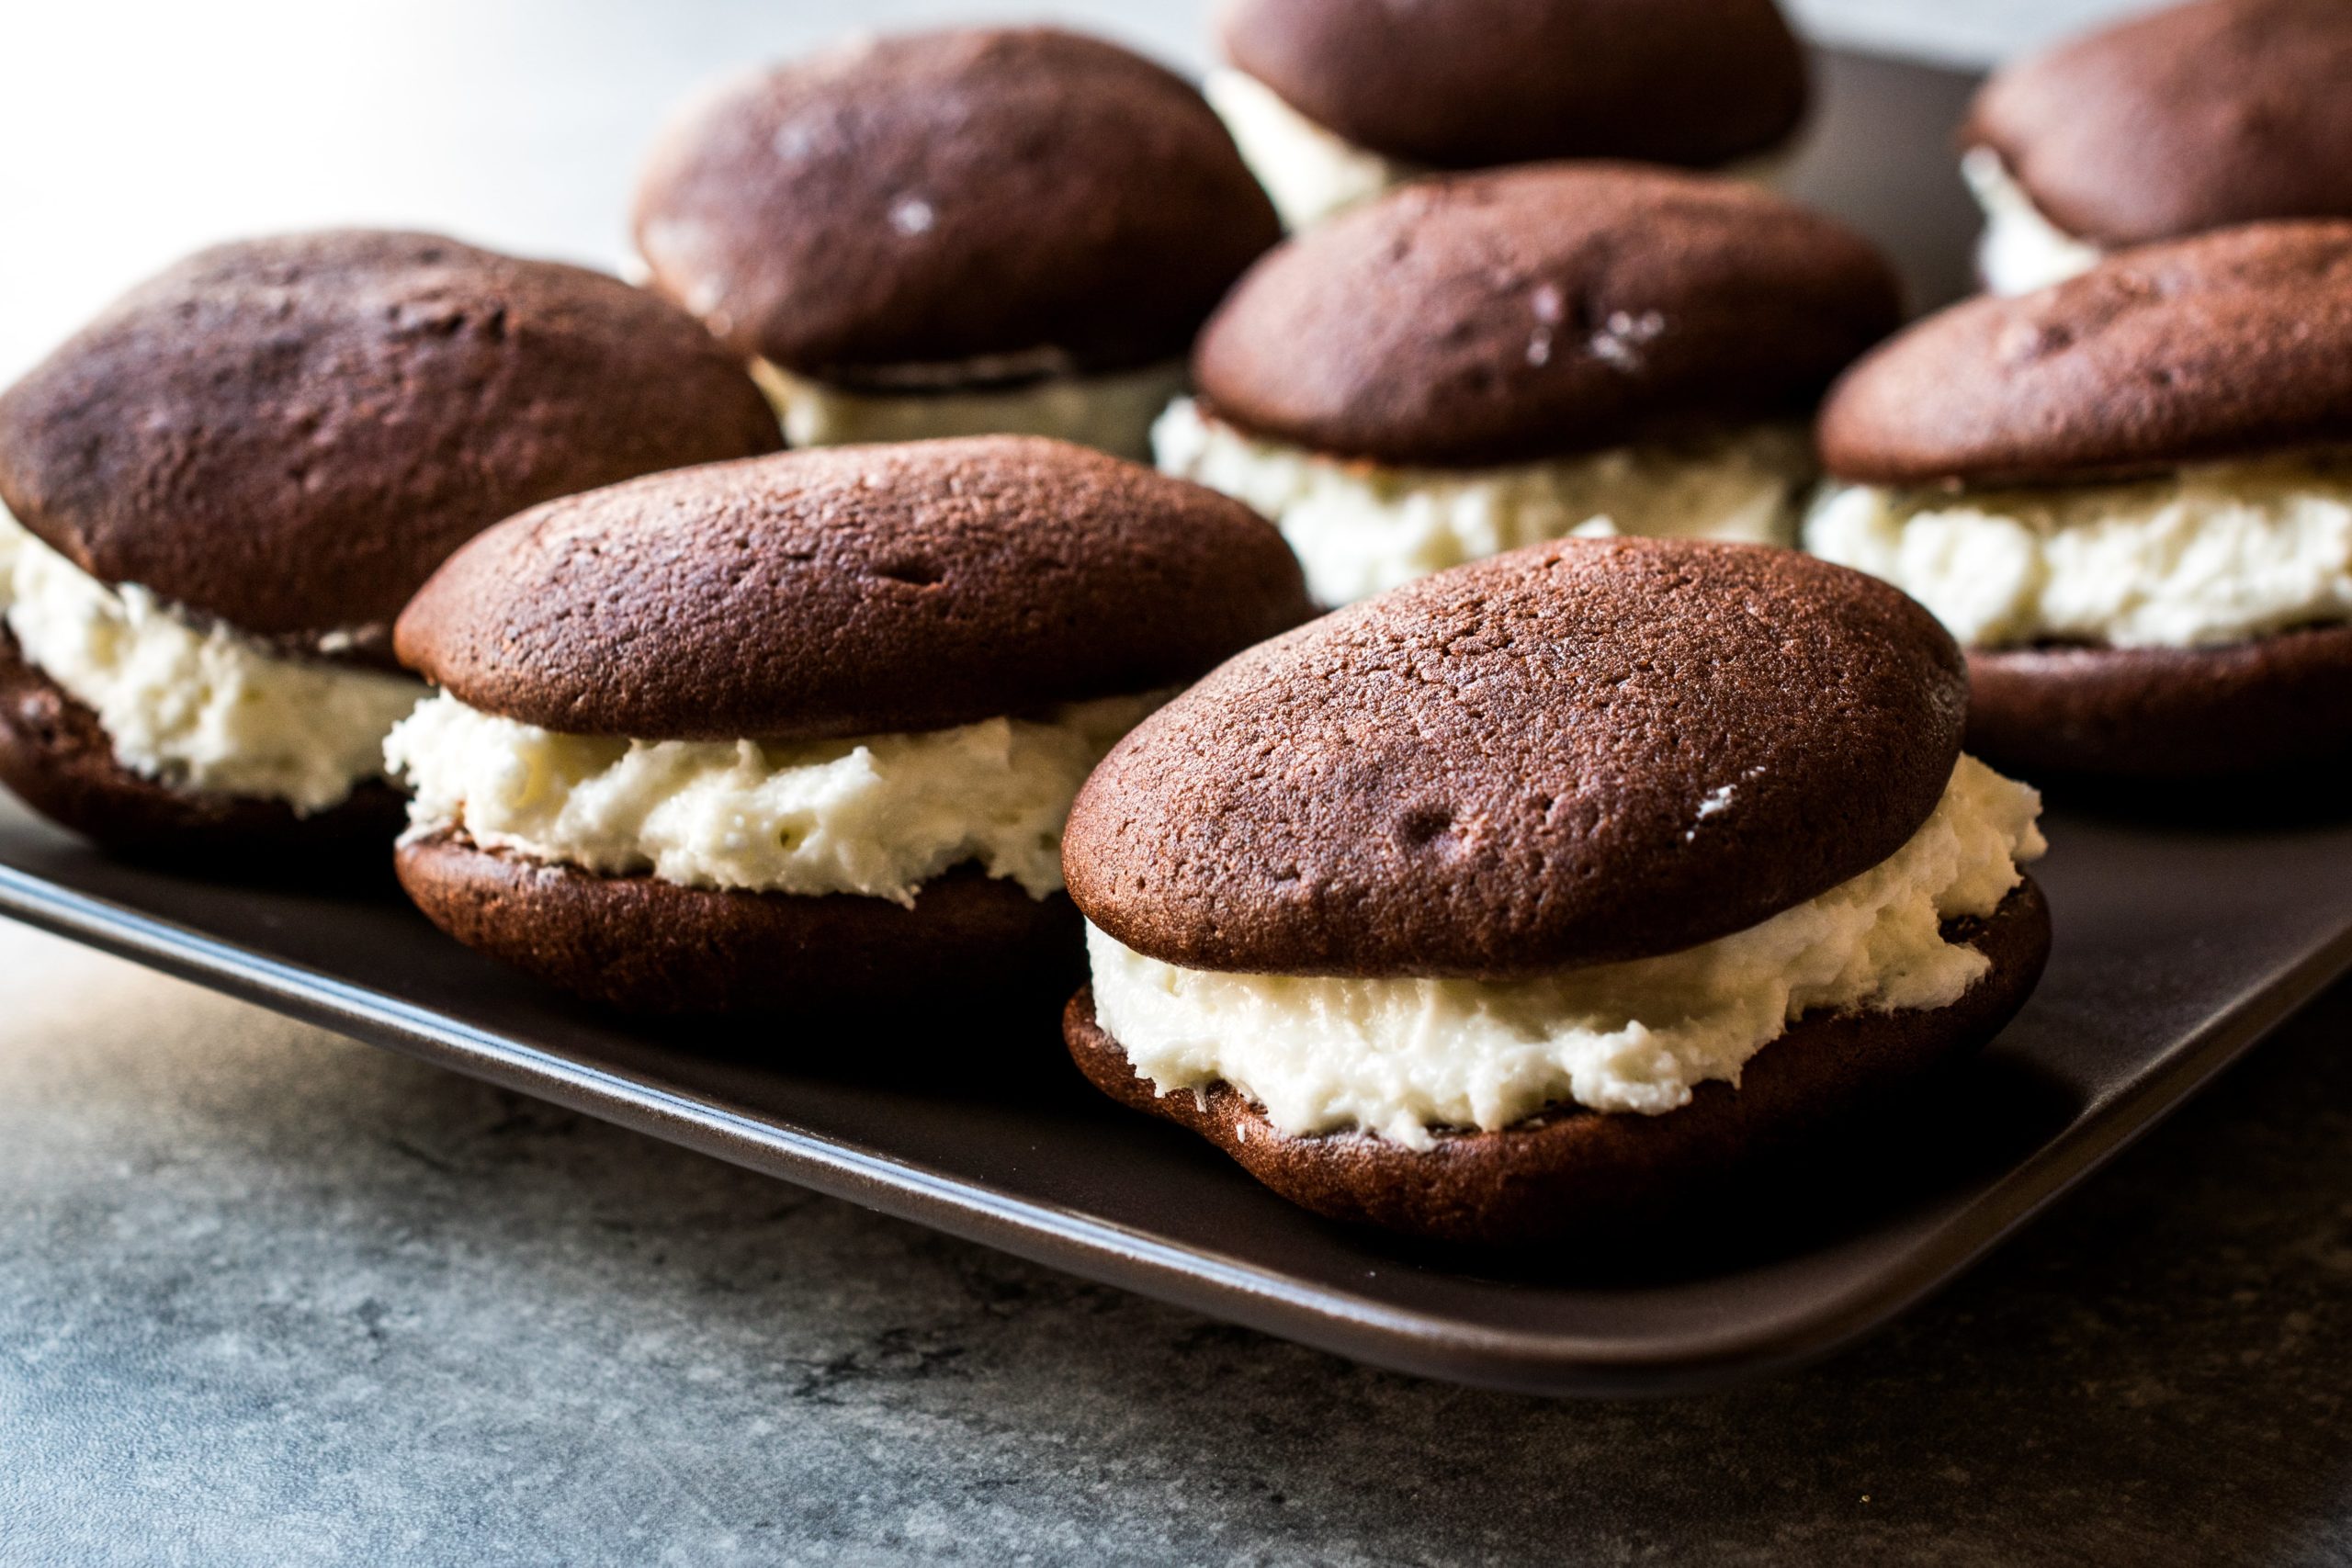 Homemade chocolate Amish whoopie pies with vanilla filling. 